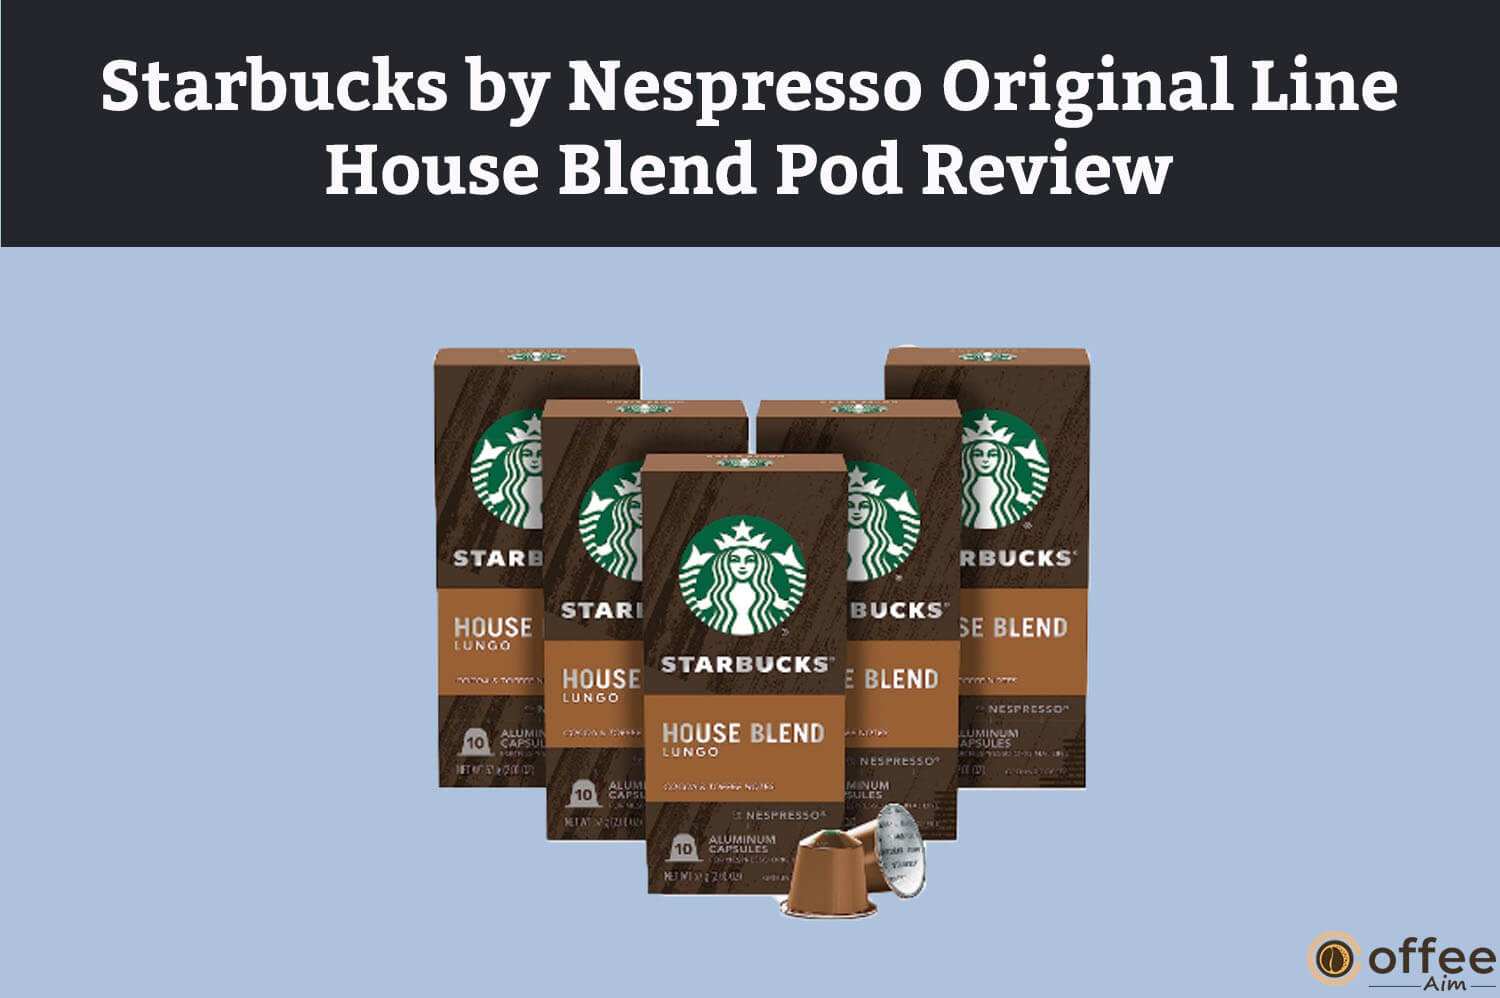 Featured image for the article "Starbucks by Nespresso Original Line House Blend Pod Review"